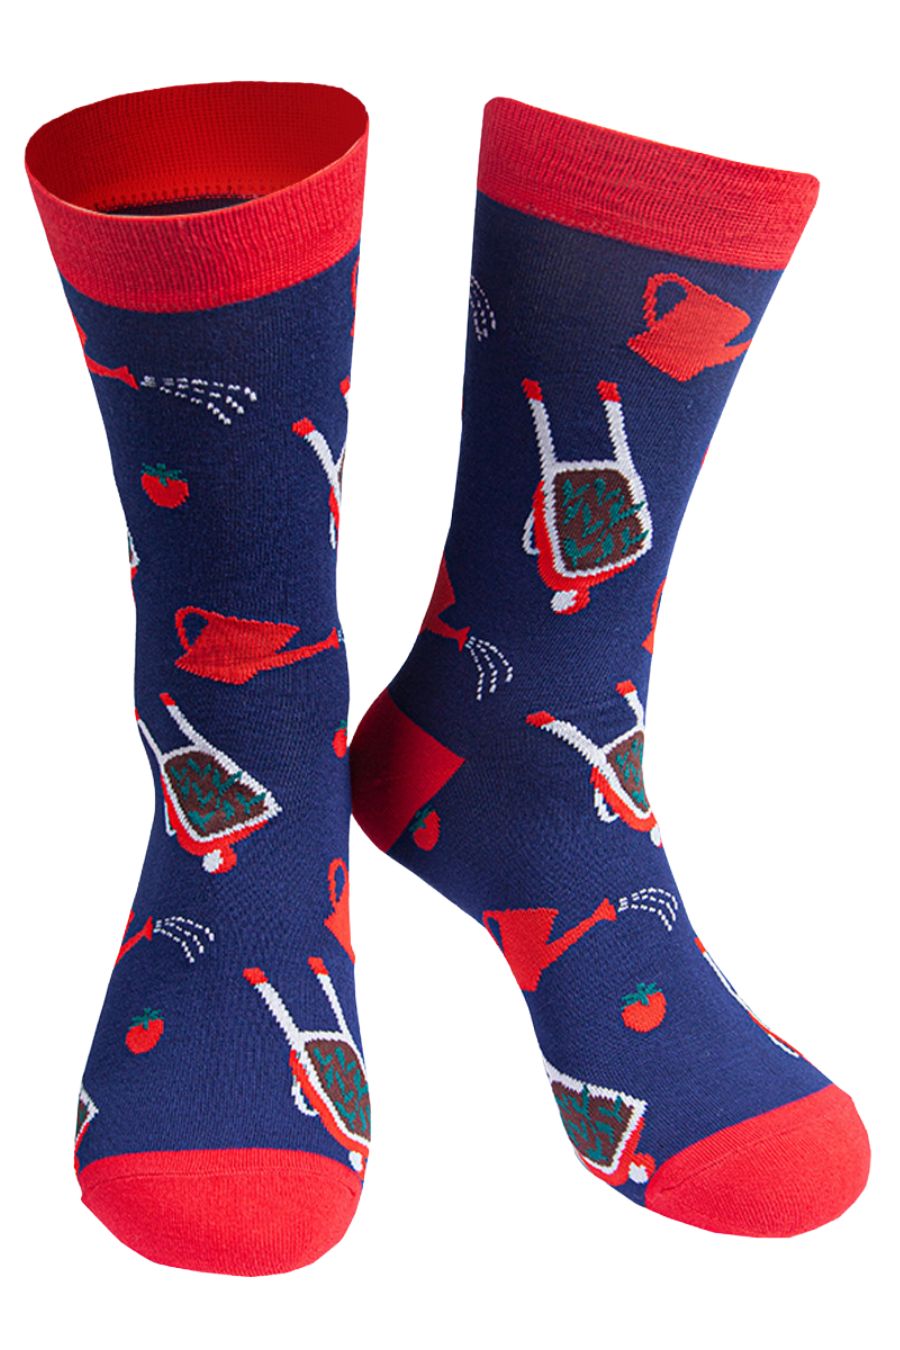 navy blue, red dress socks featuring wheelbarrows, watering cans and tomatos